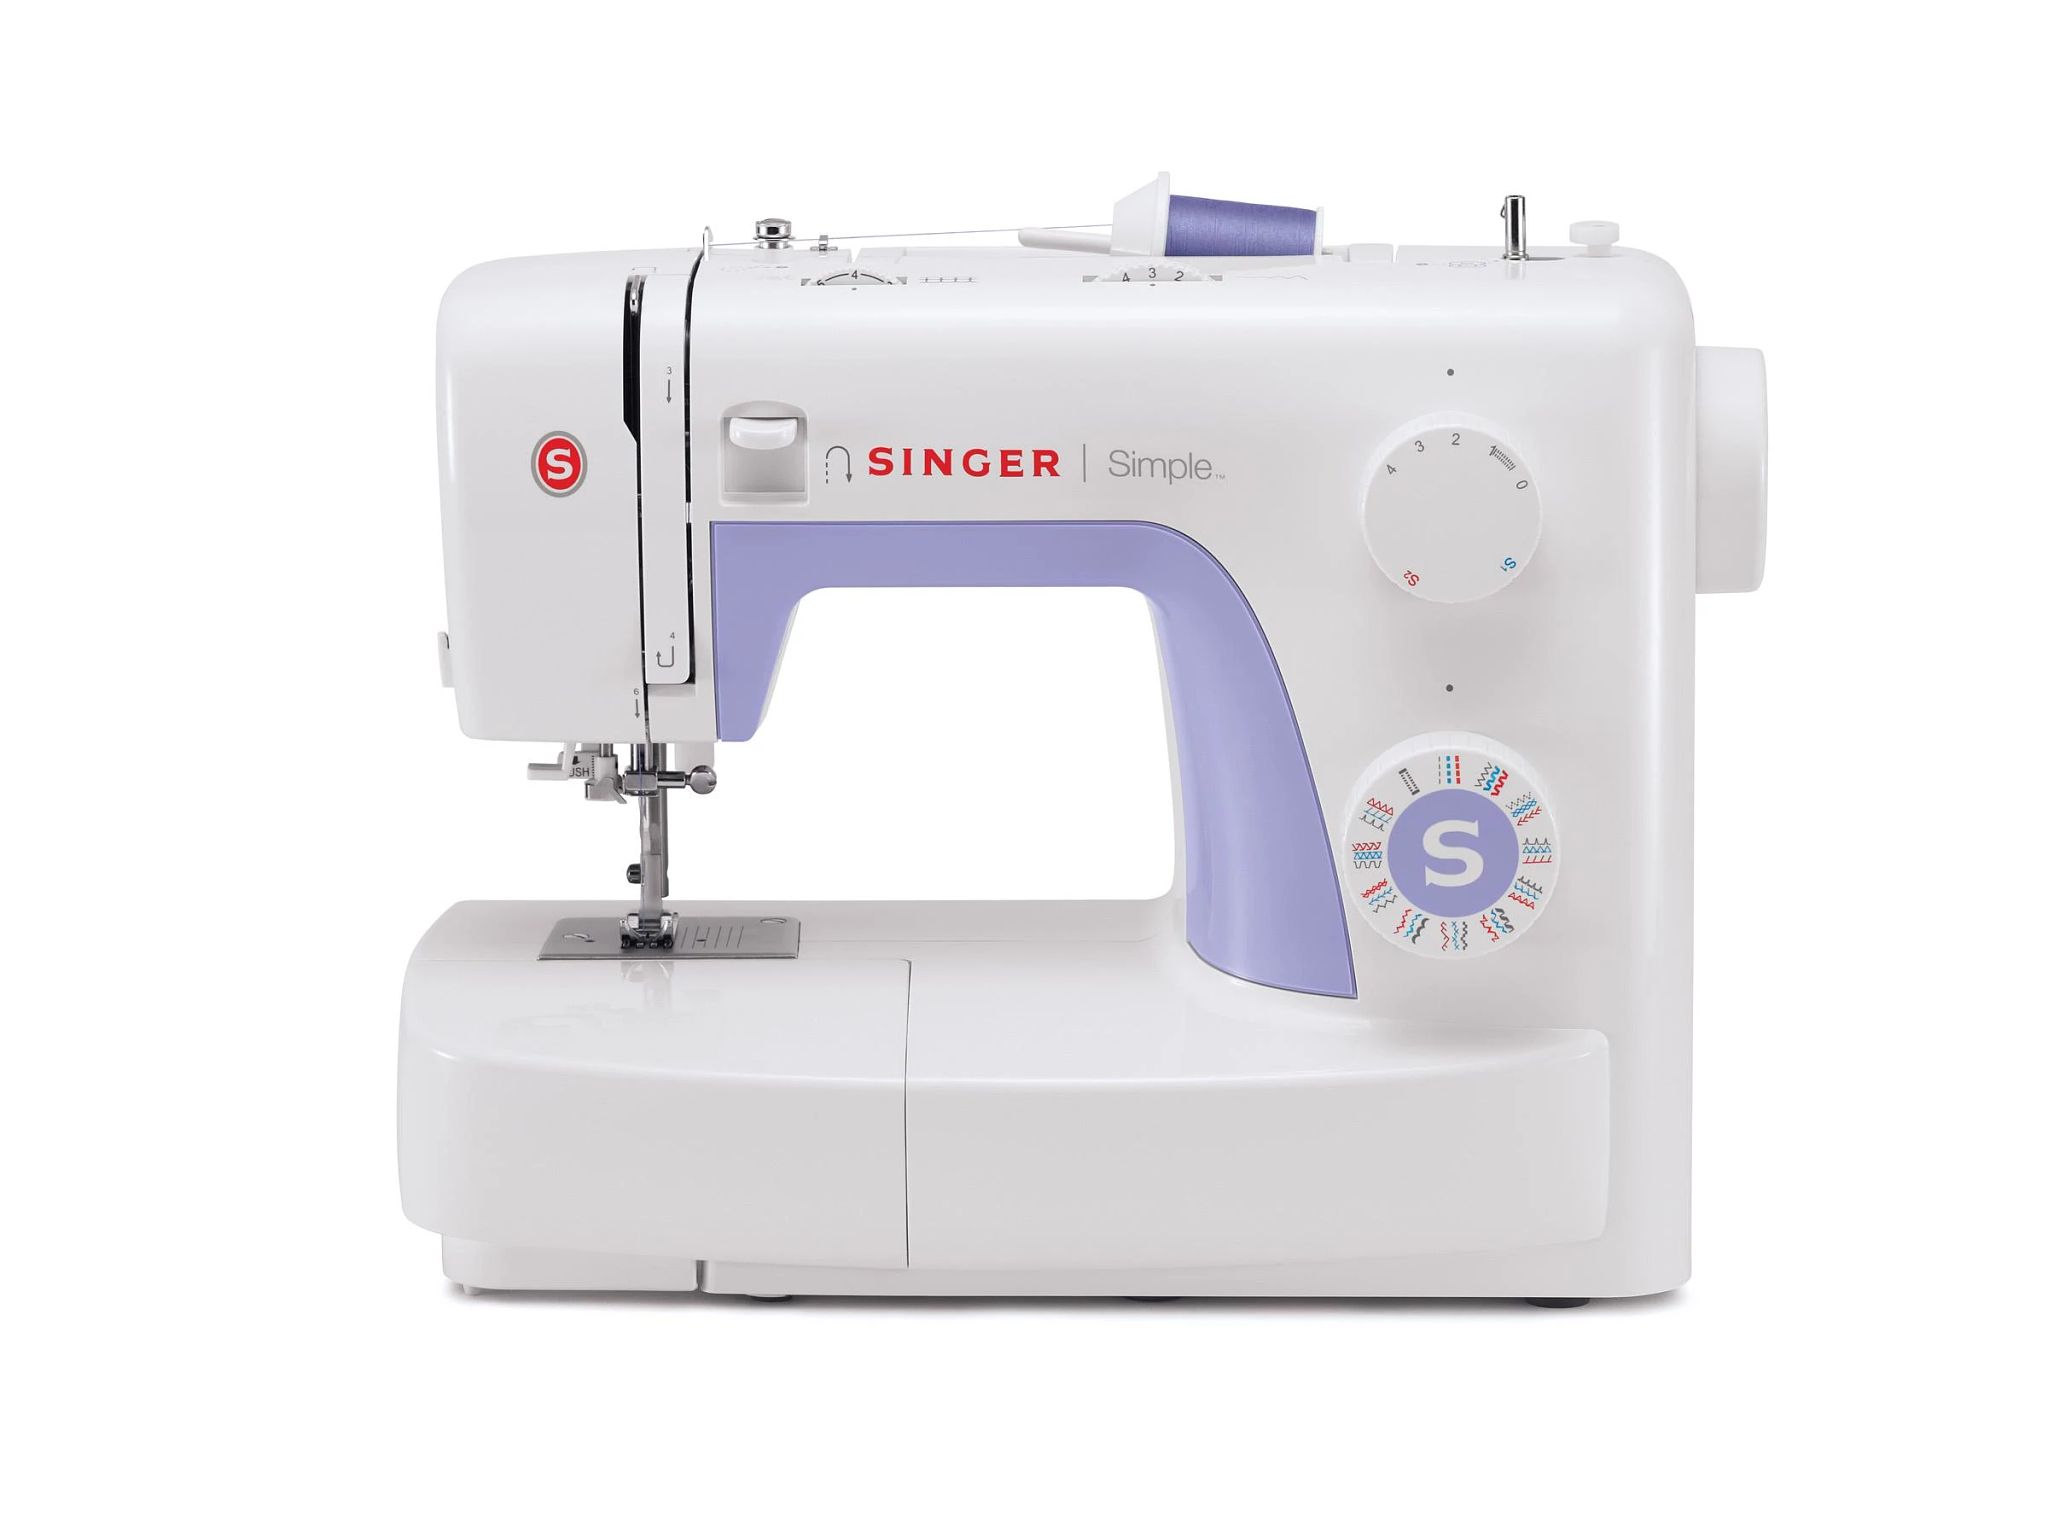 Singer Simple Sewing Machine 2263 With Hard Case for Sale in